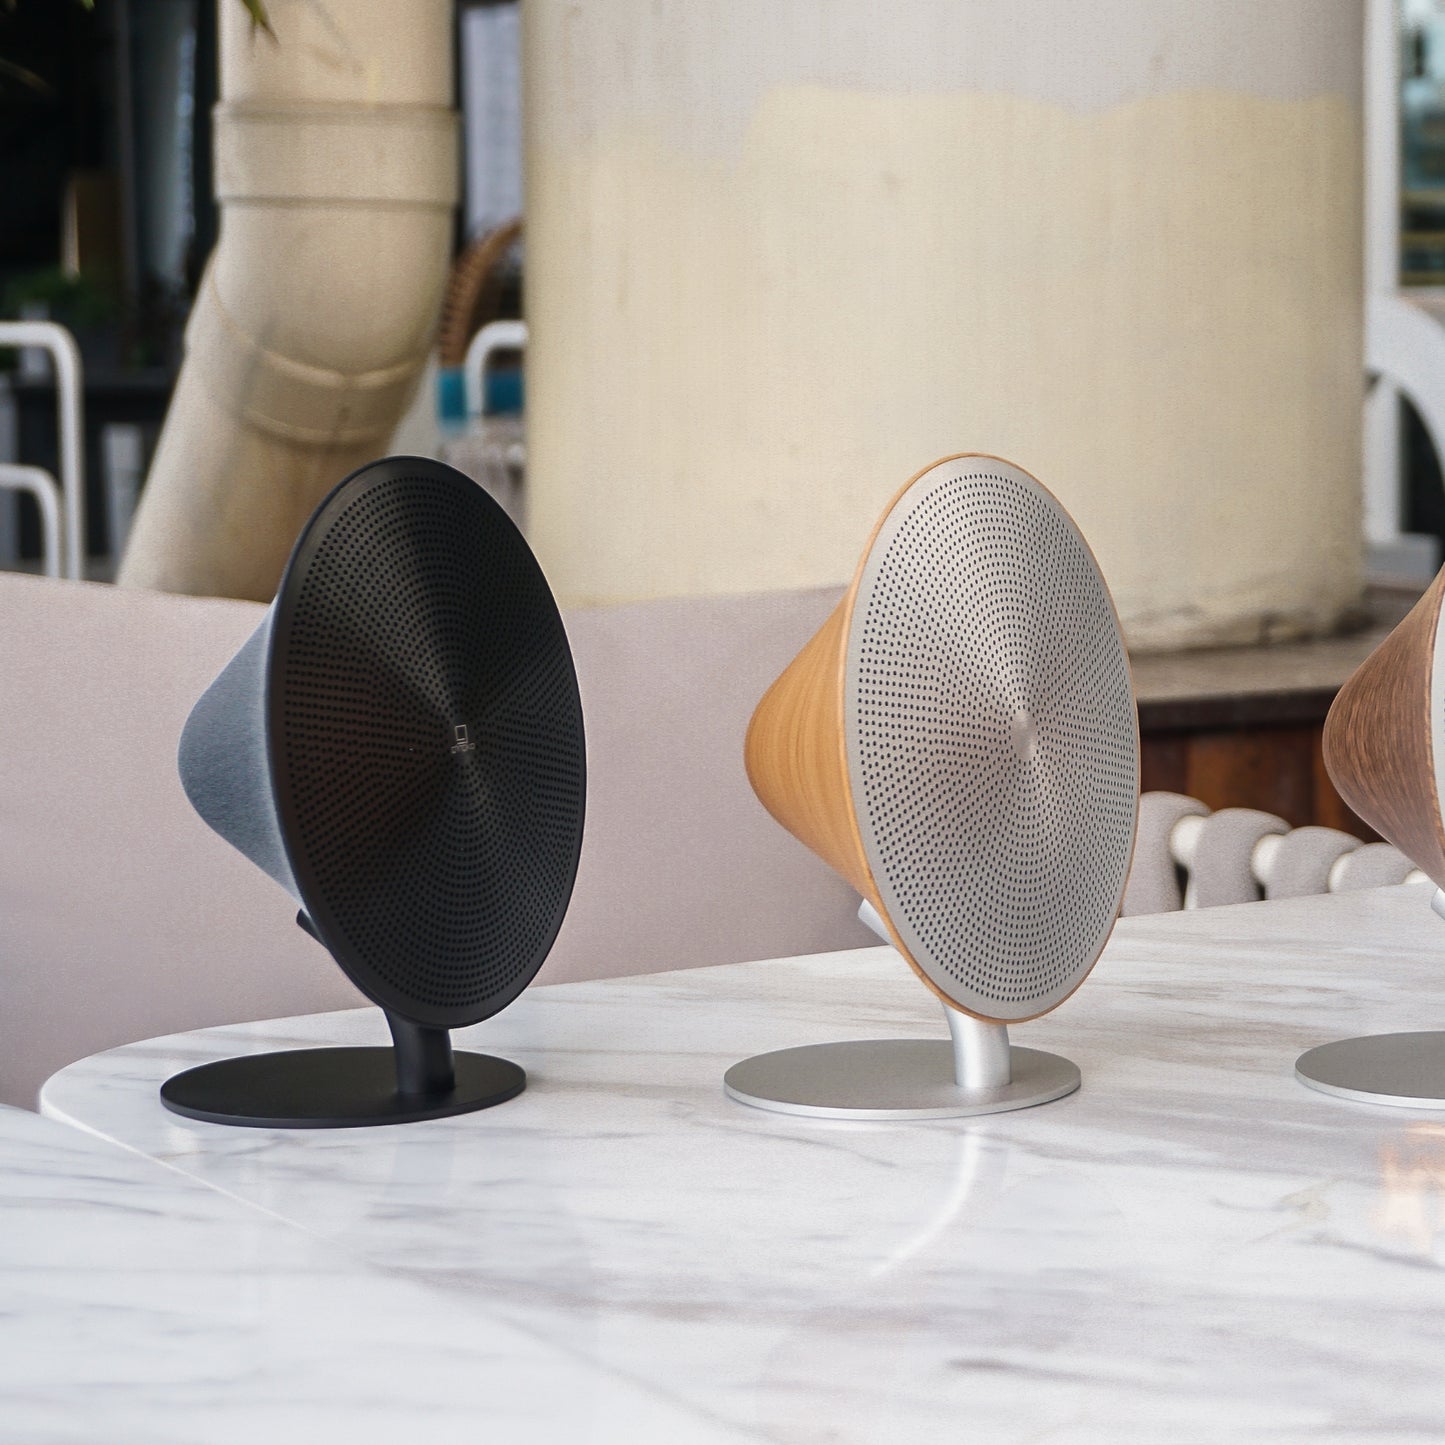 gingko mini Halo one speakers on marble table